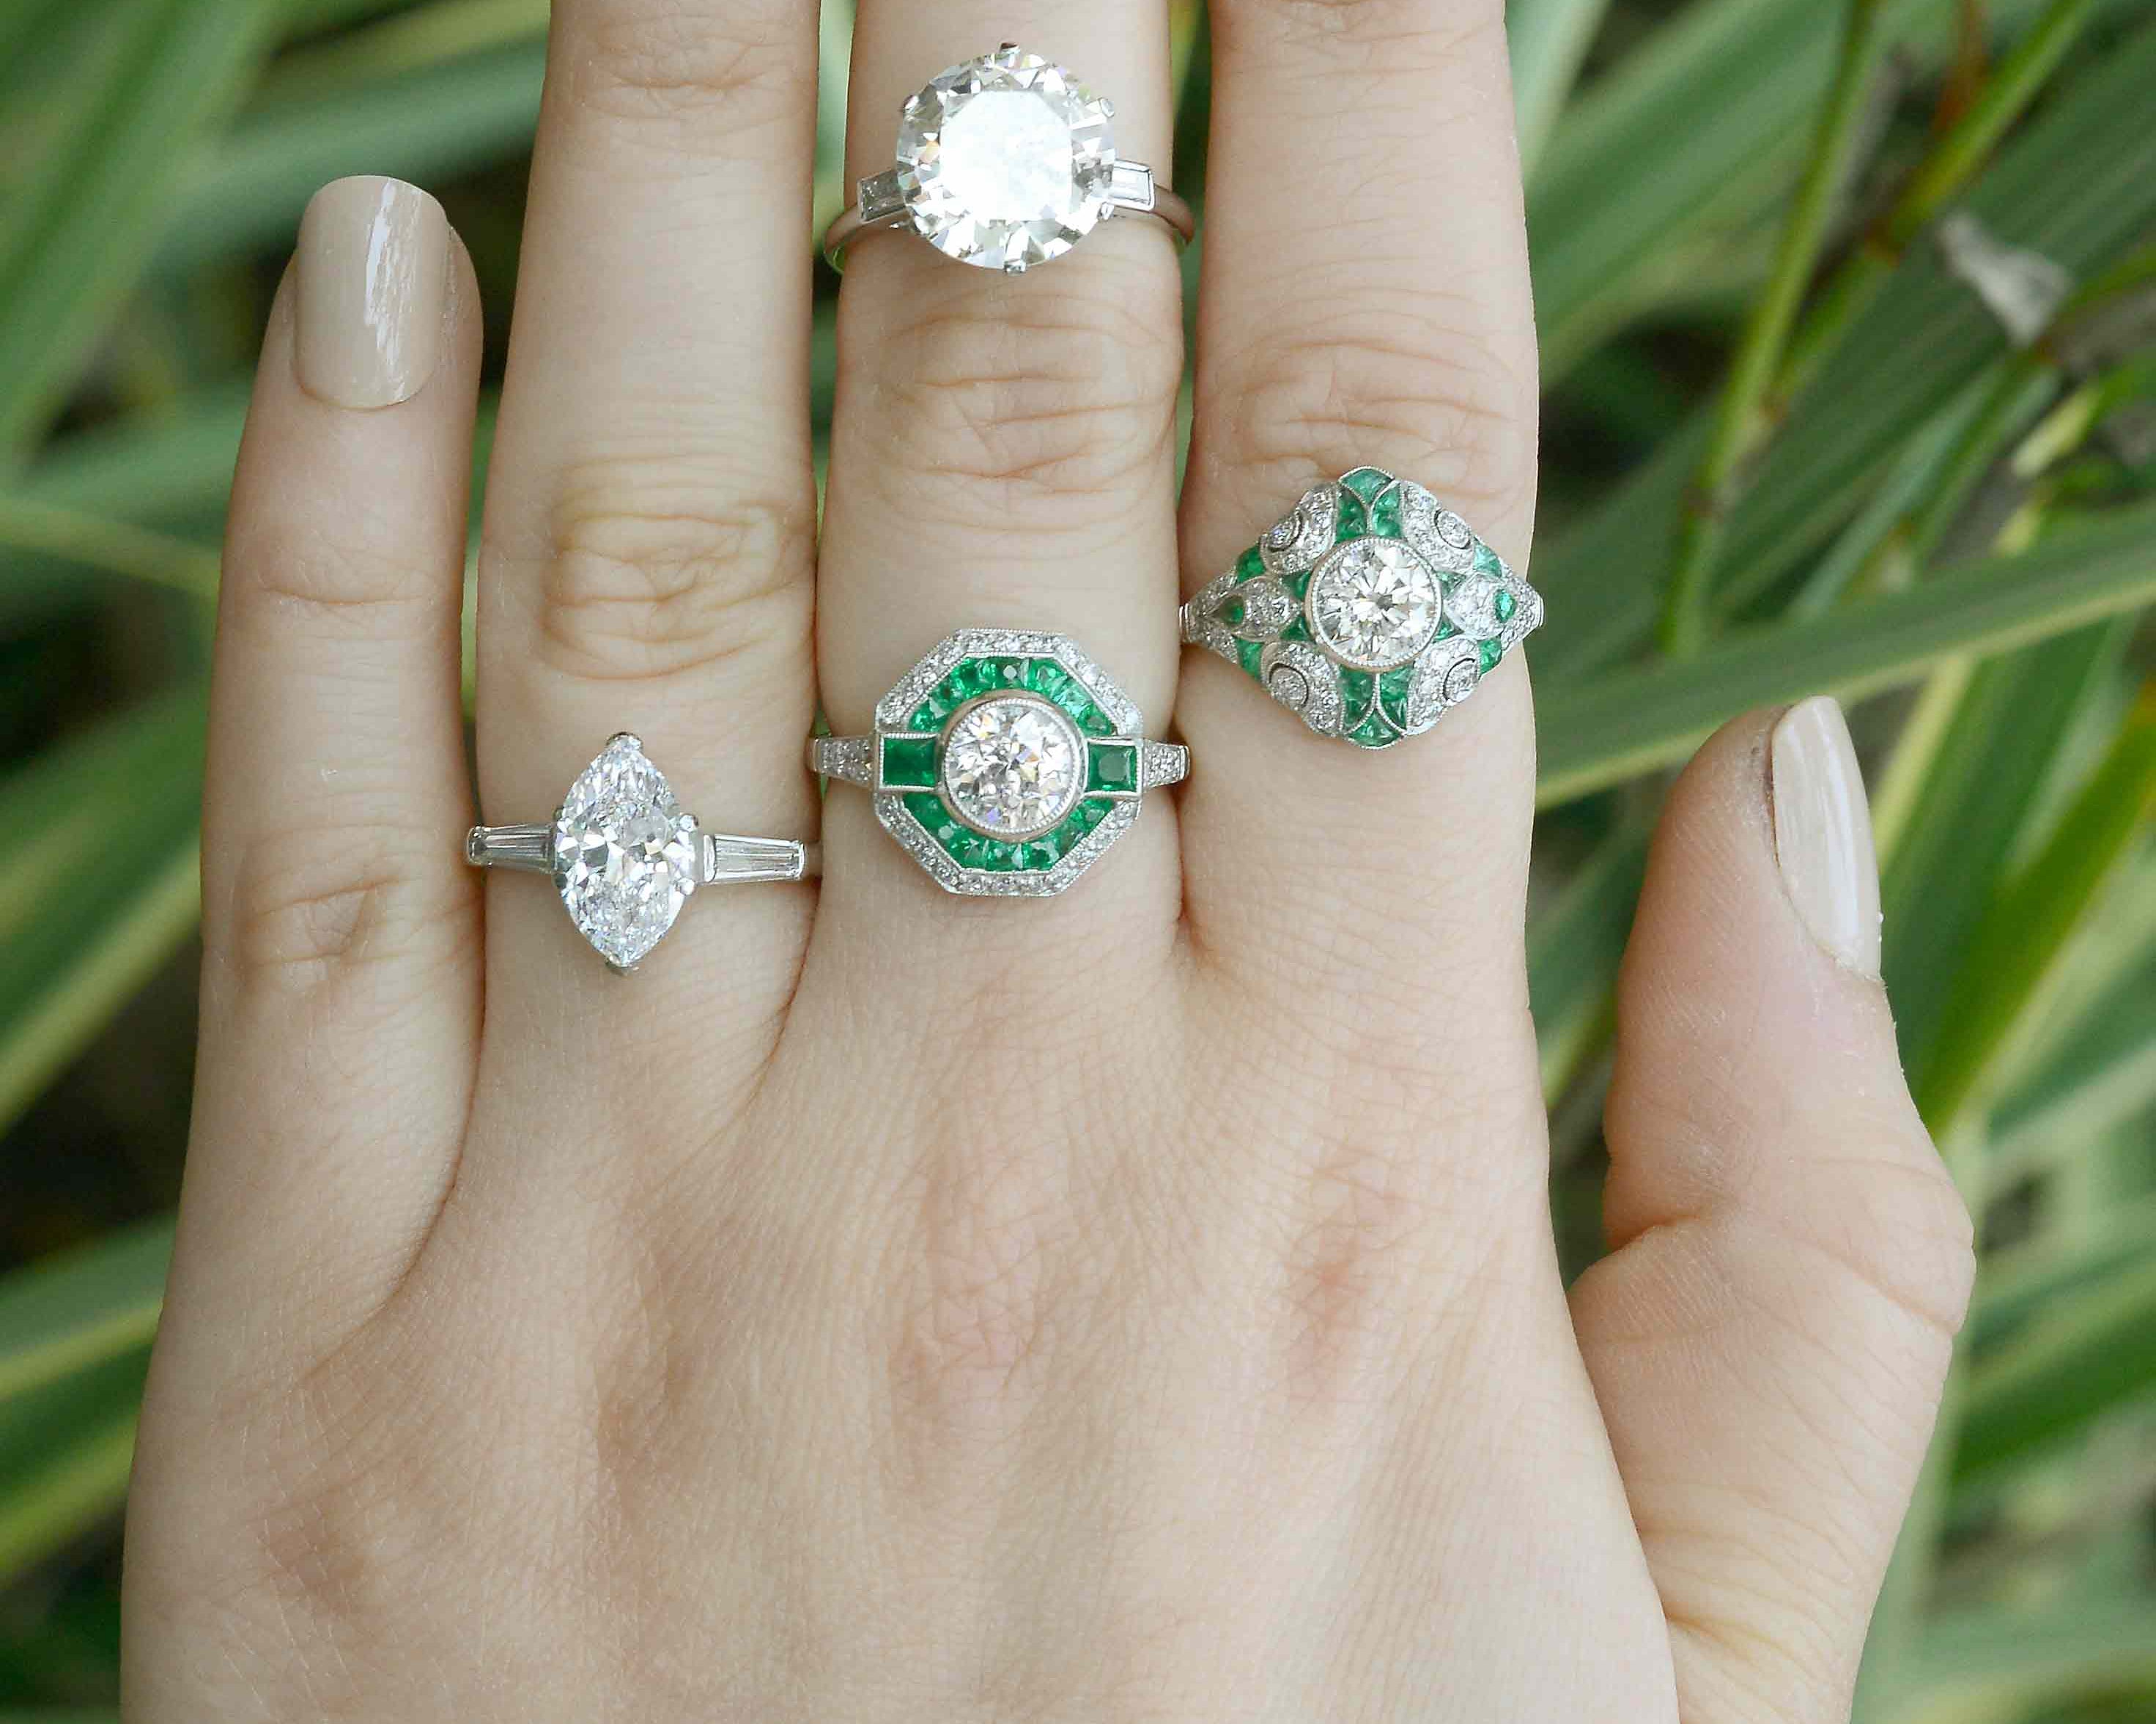 Some diamond and emerald engagment rings available from our gallery.